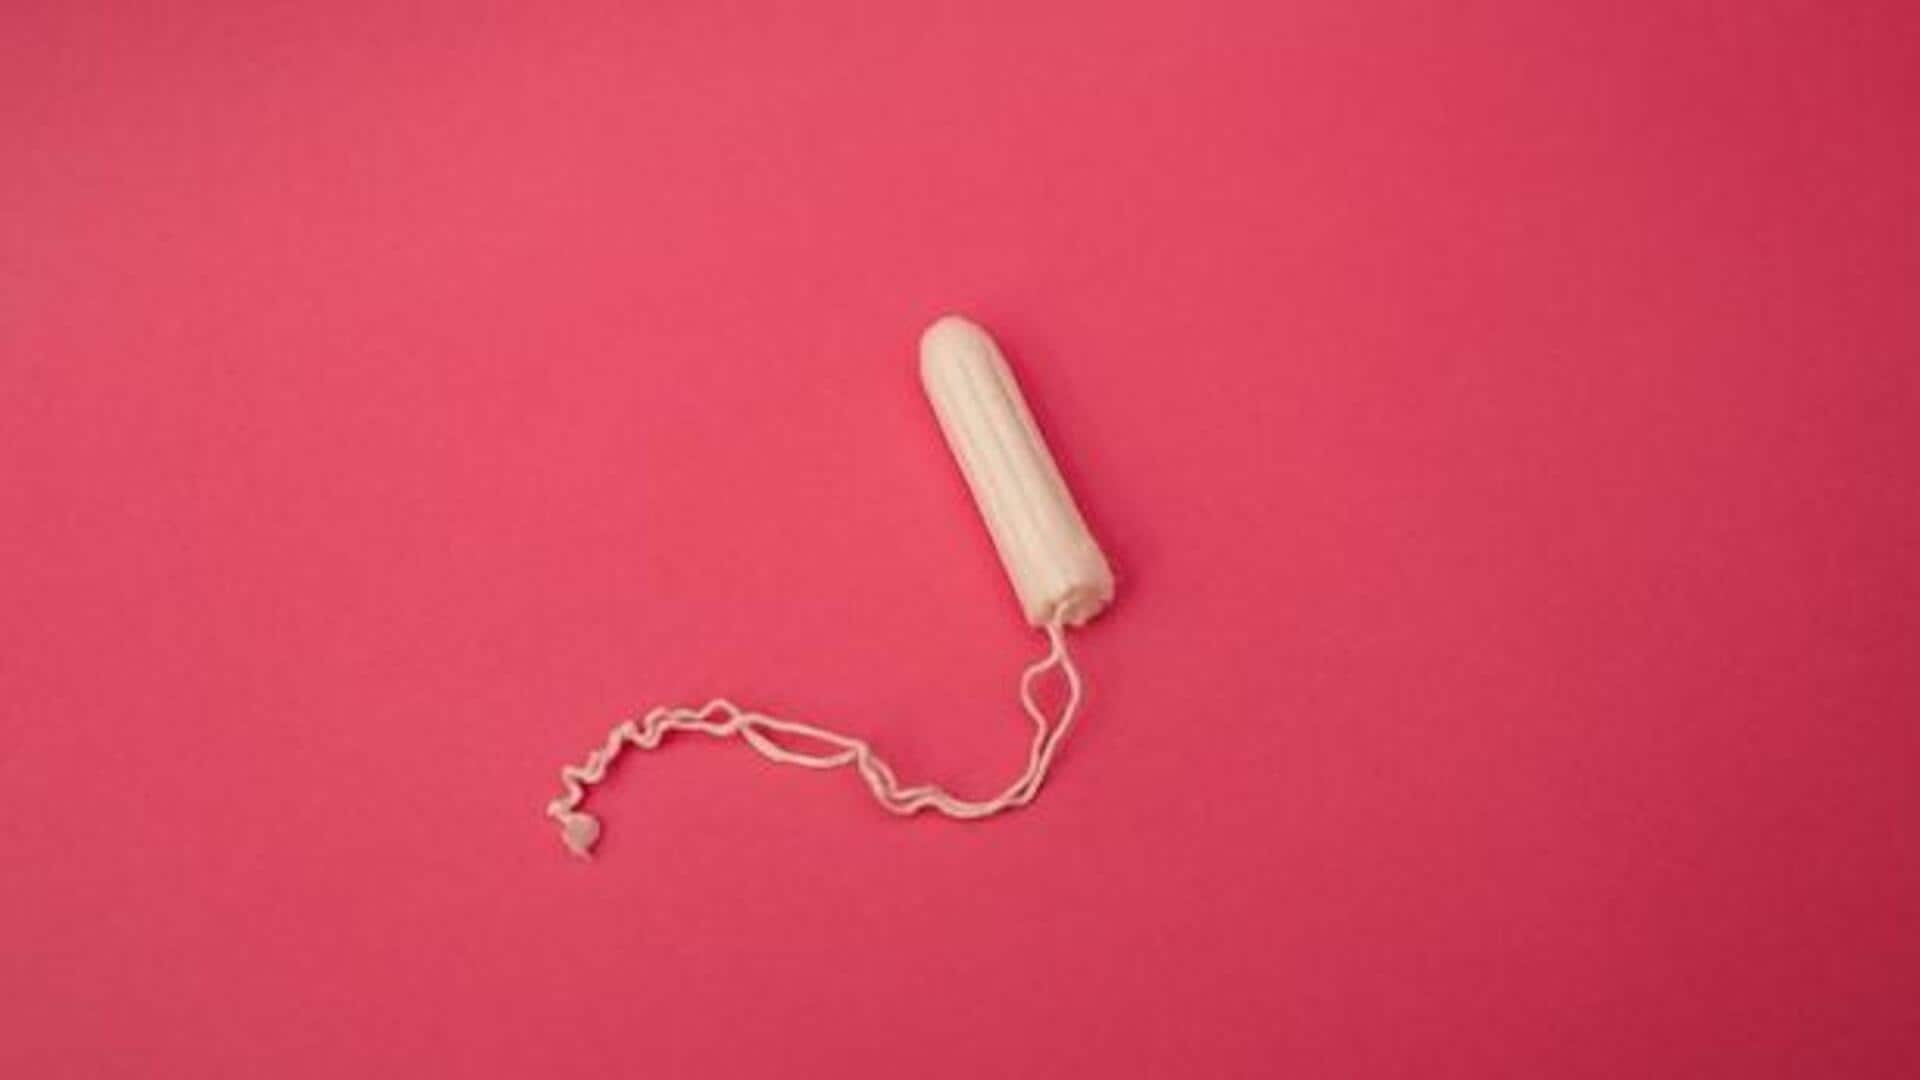 British start-up develops tampon that can test for STIs